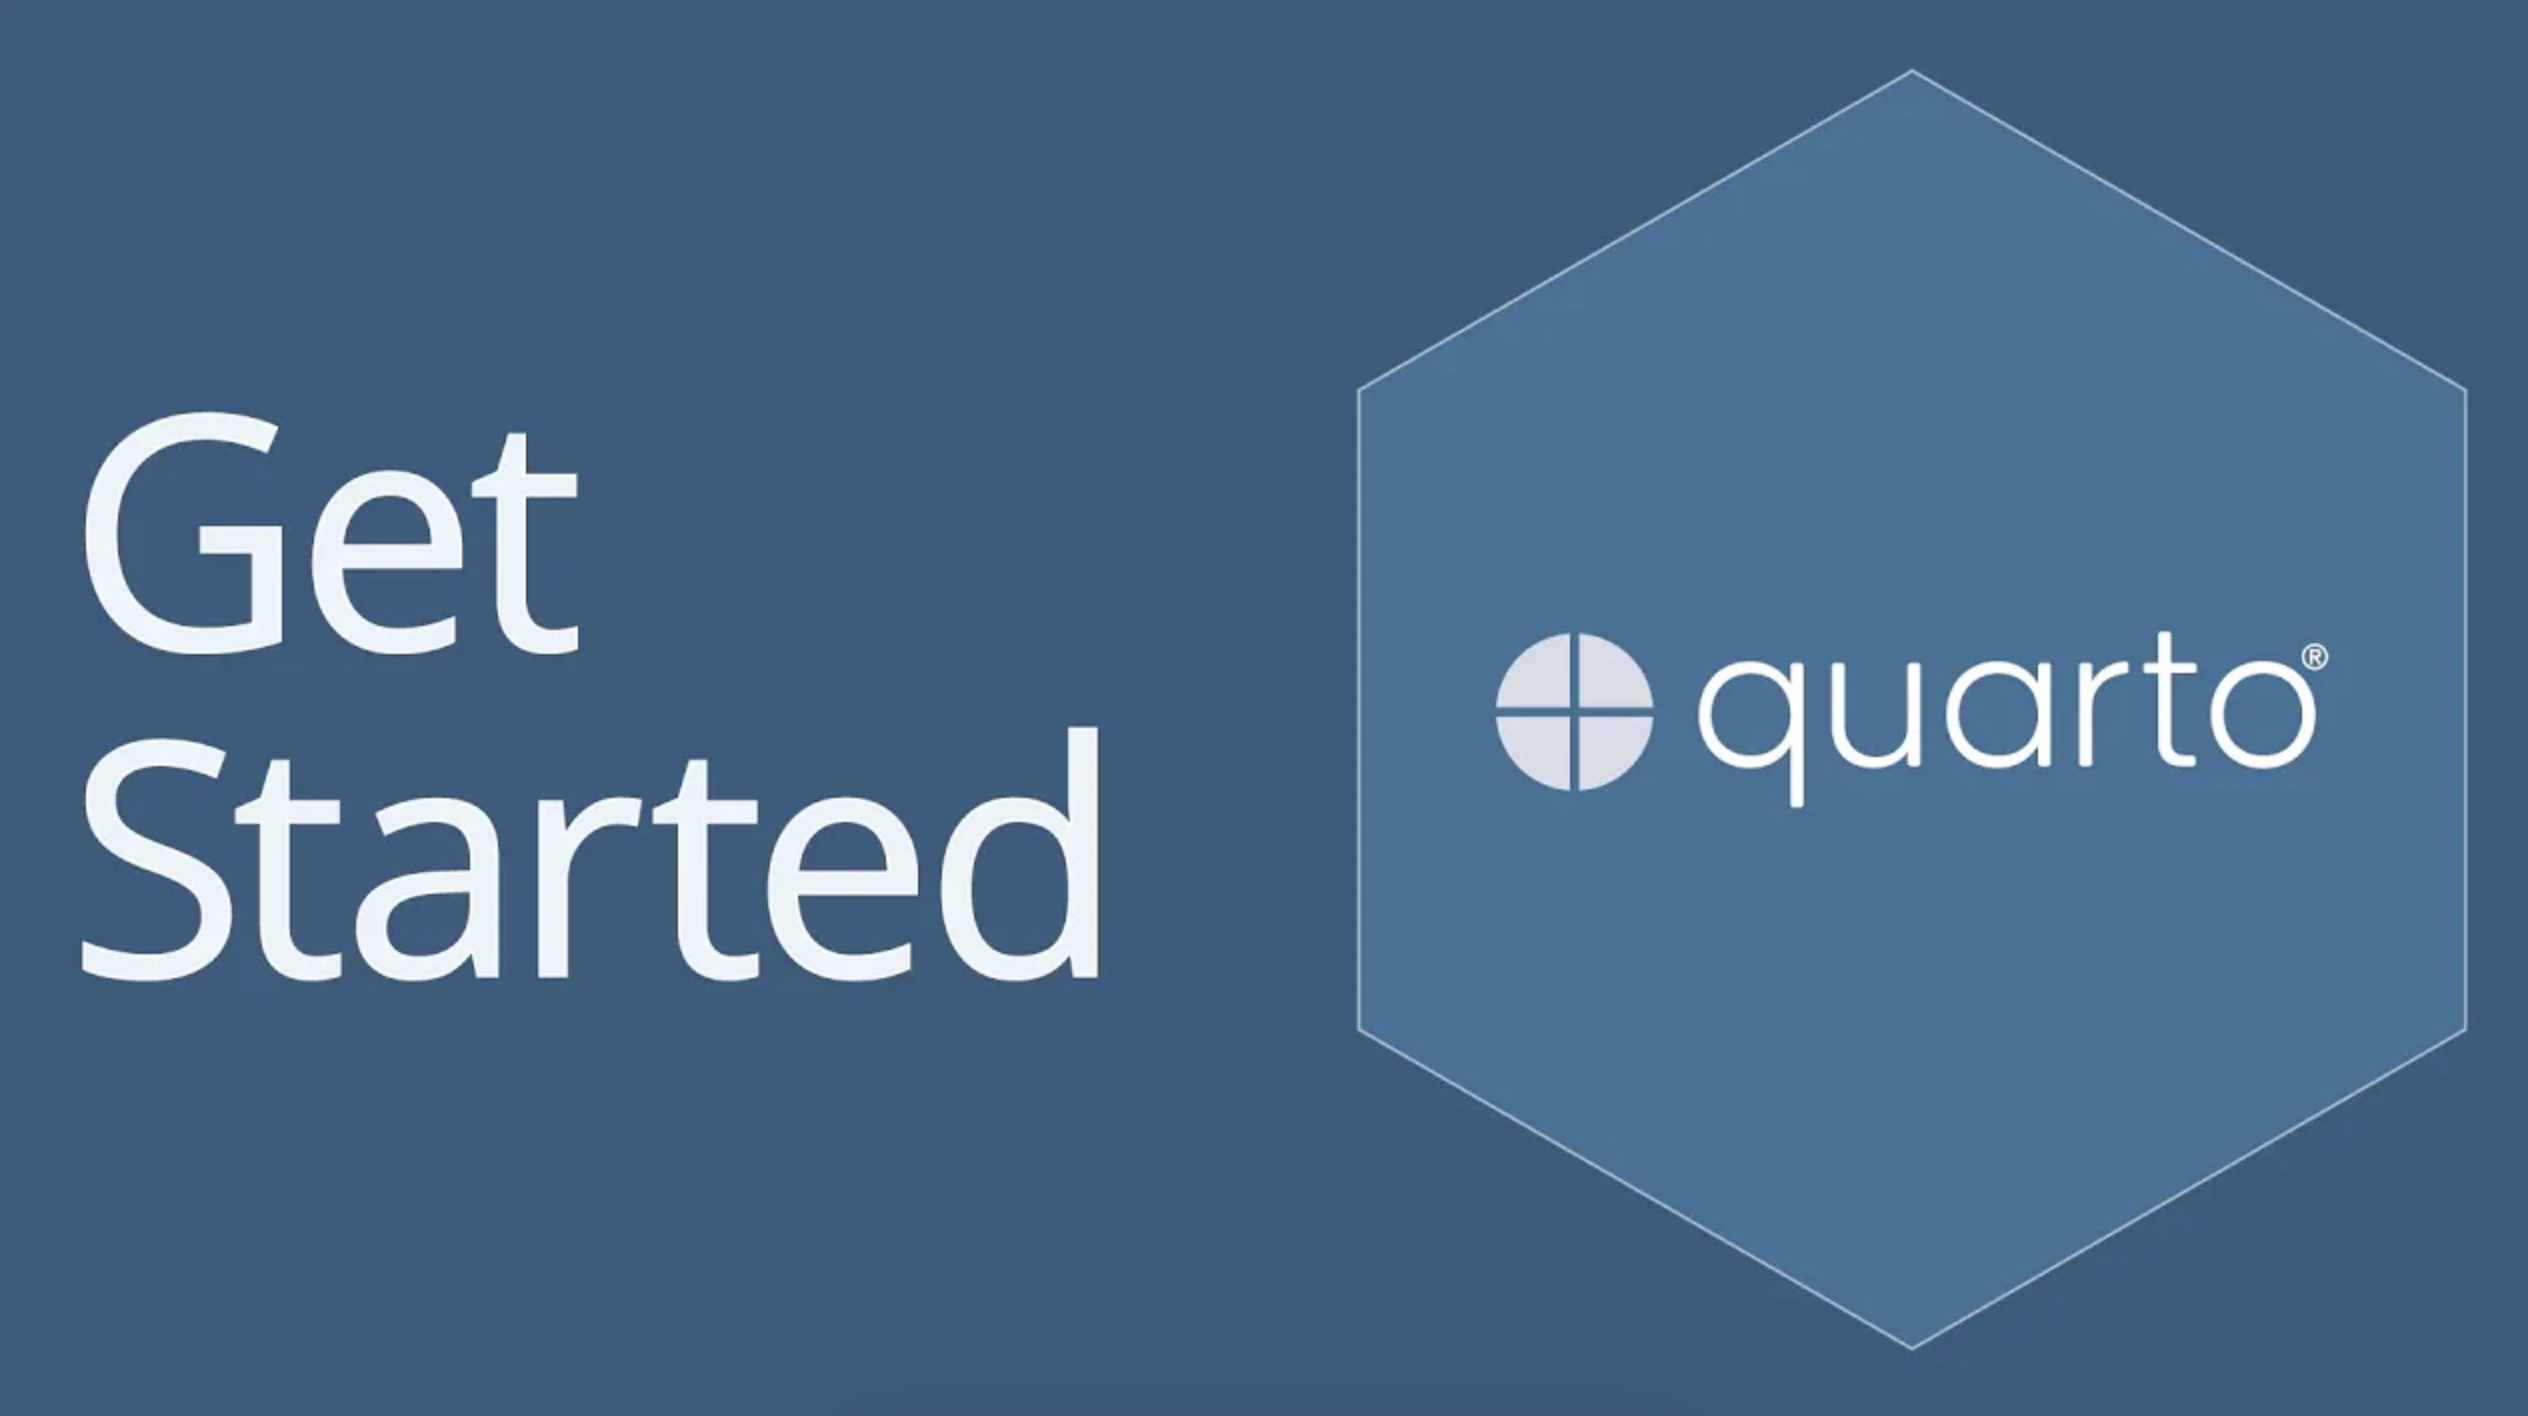 Quarto logo on a blue background and the title of the video - Get started with Quarto